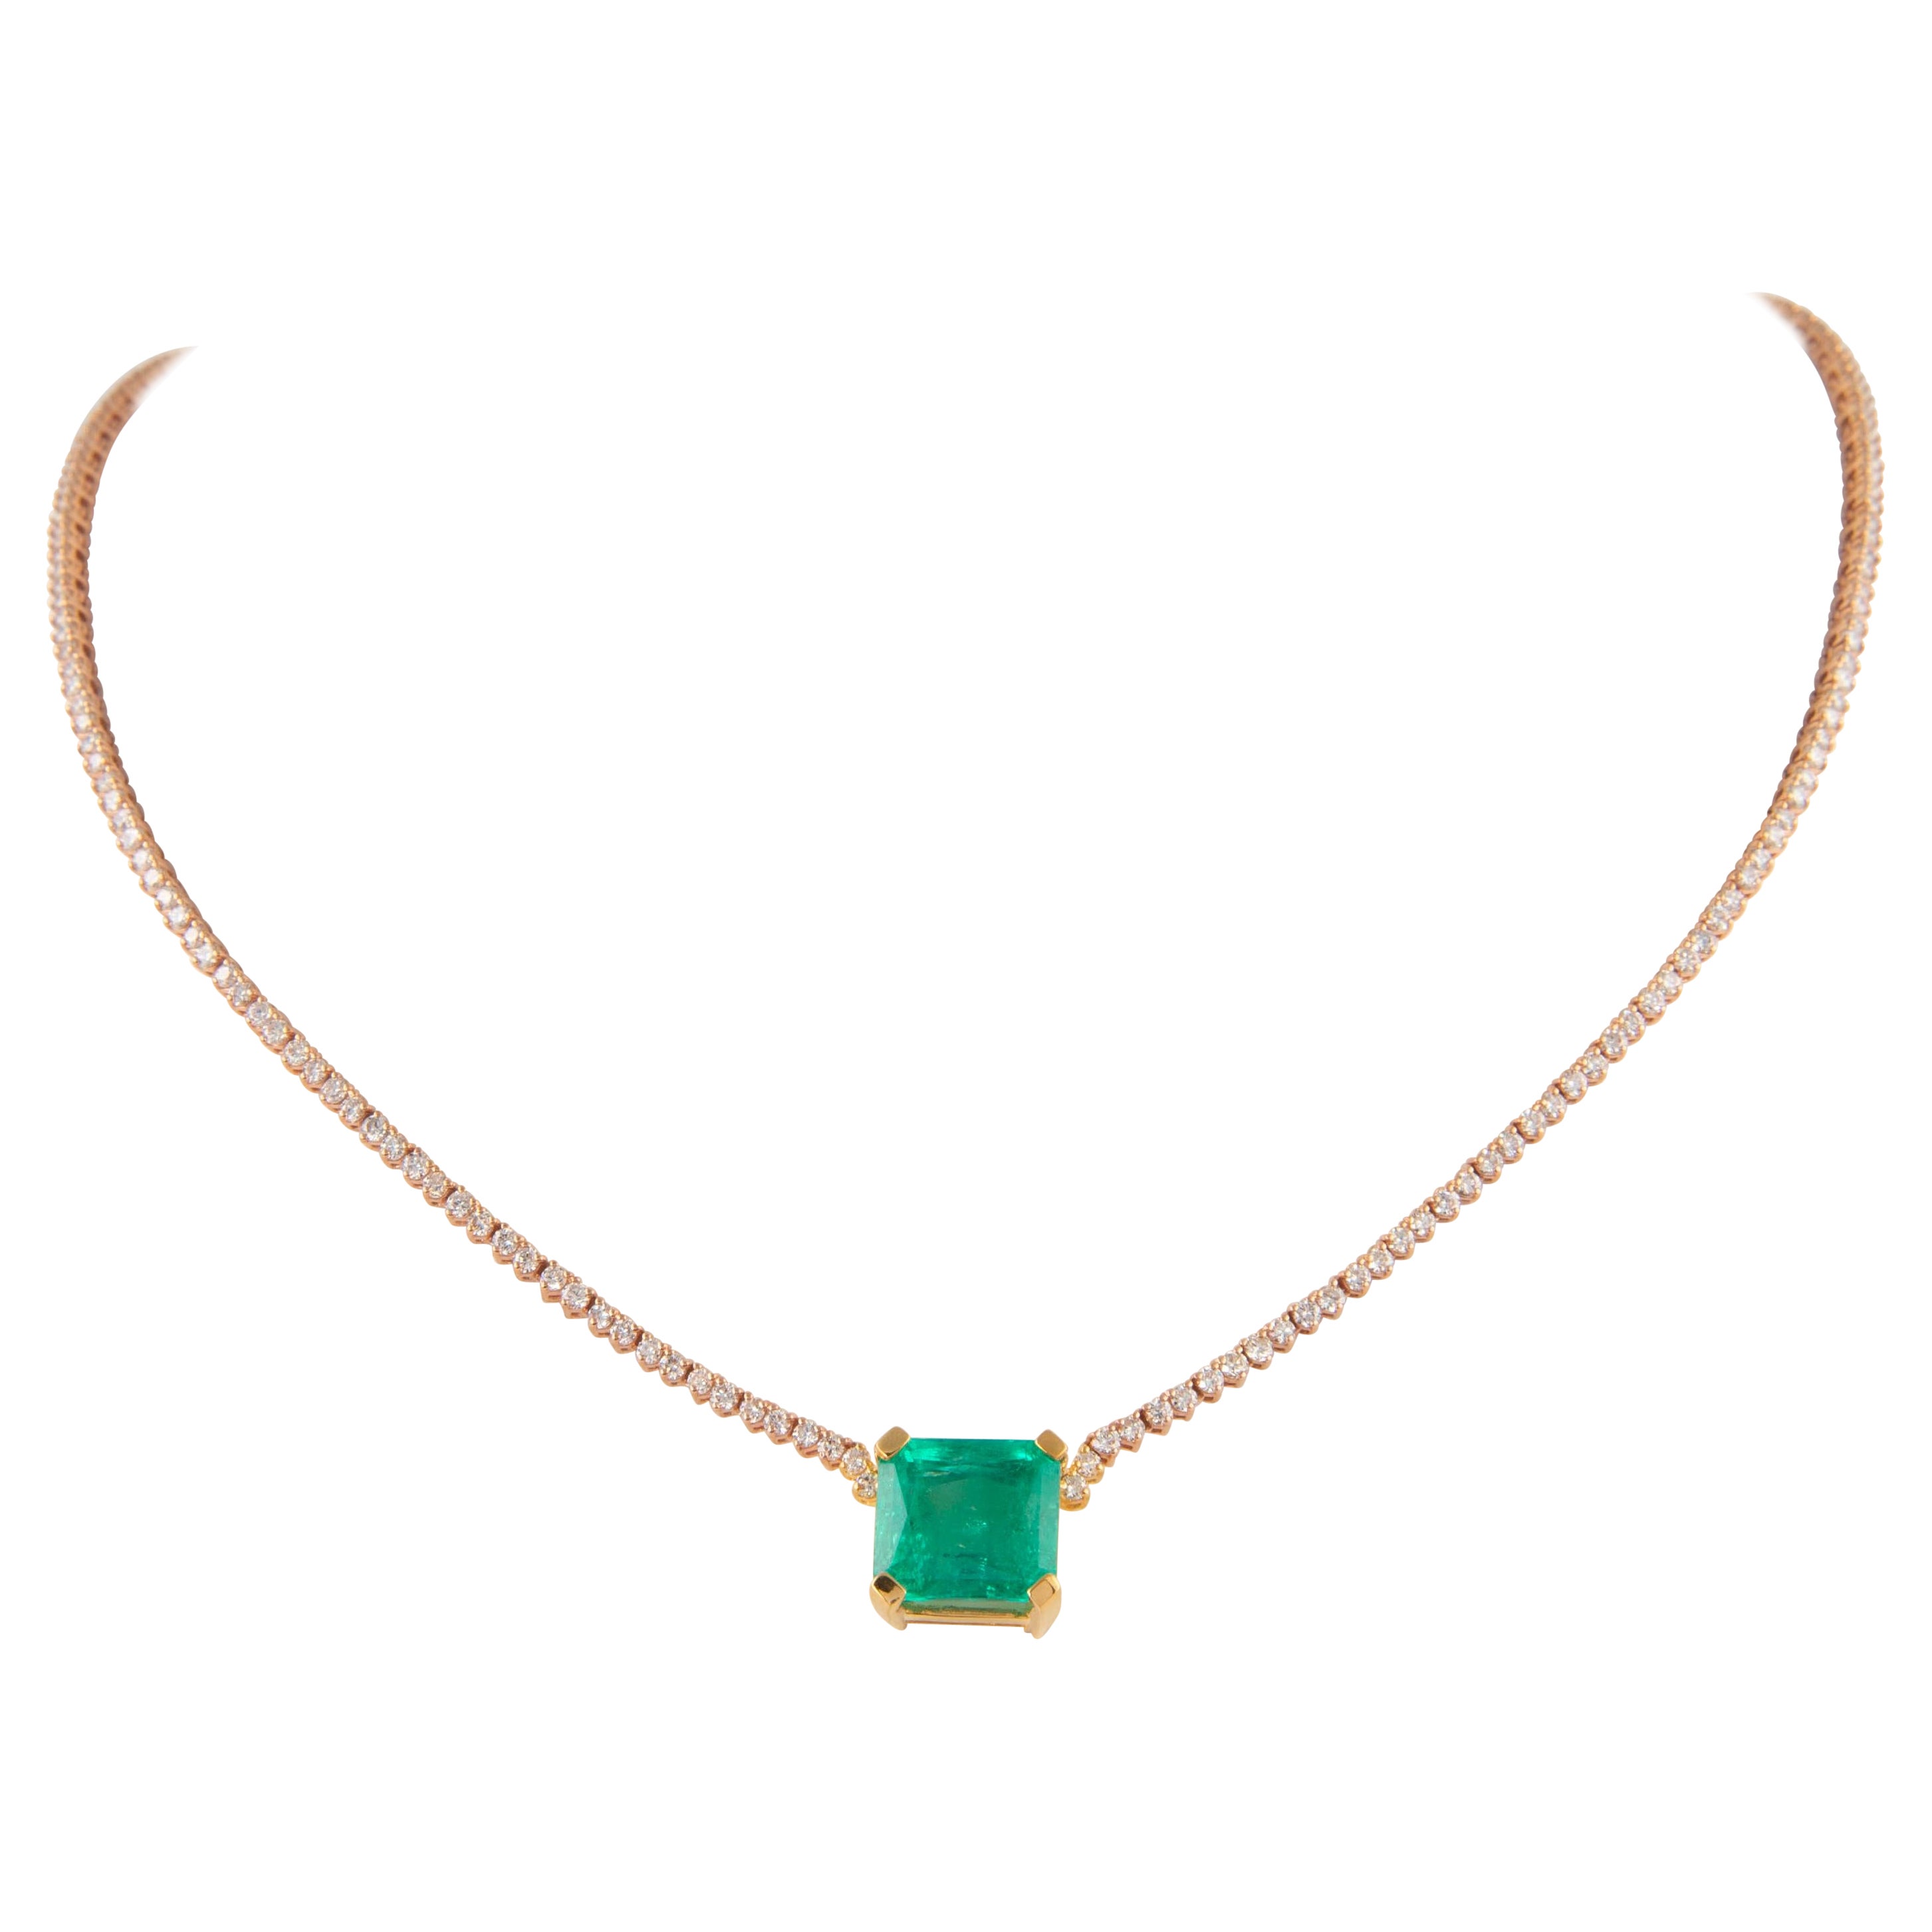 Alexander 10.11ct Colombian Emerald & Diamond Tennis Necklace 18k Gold For Sale